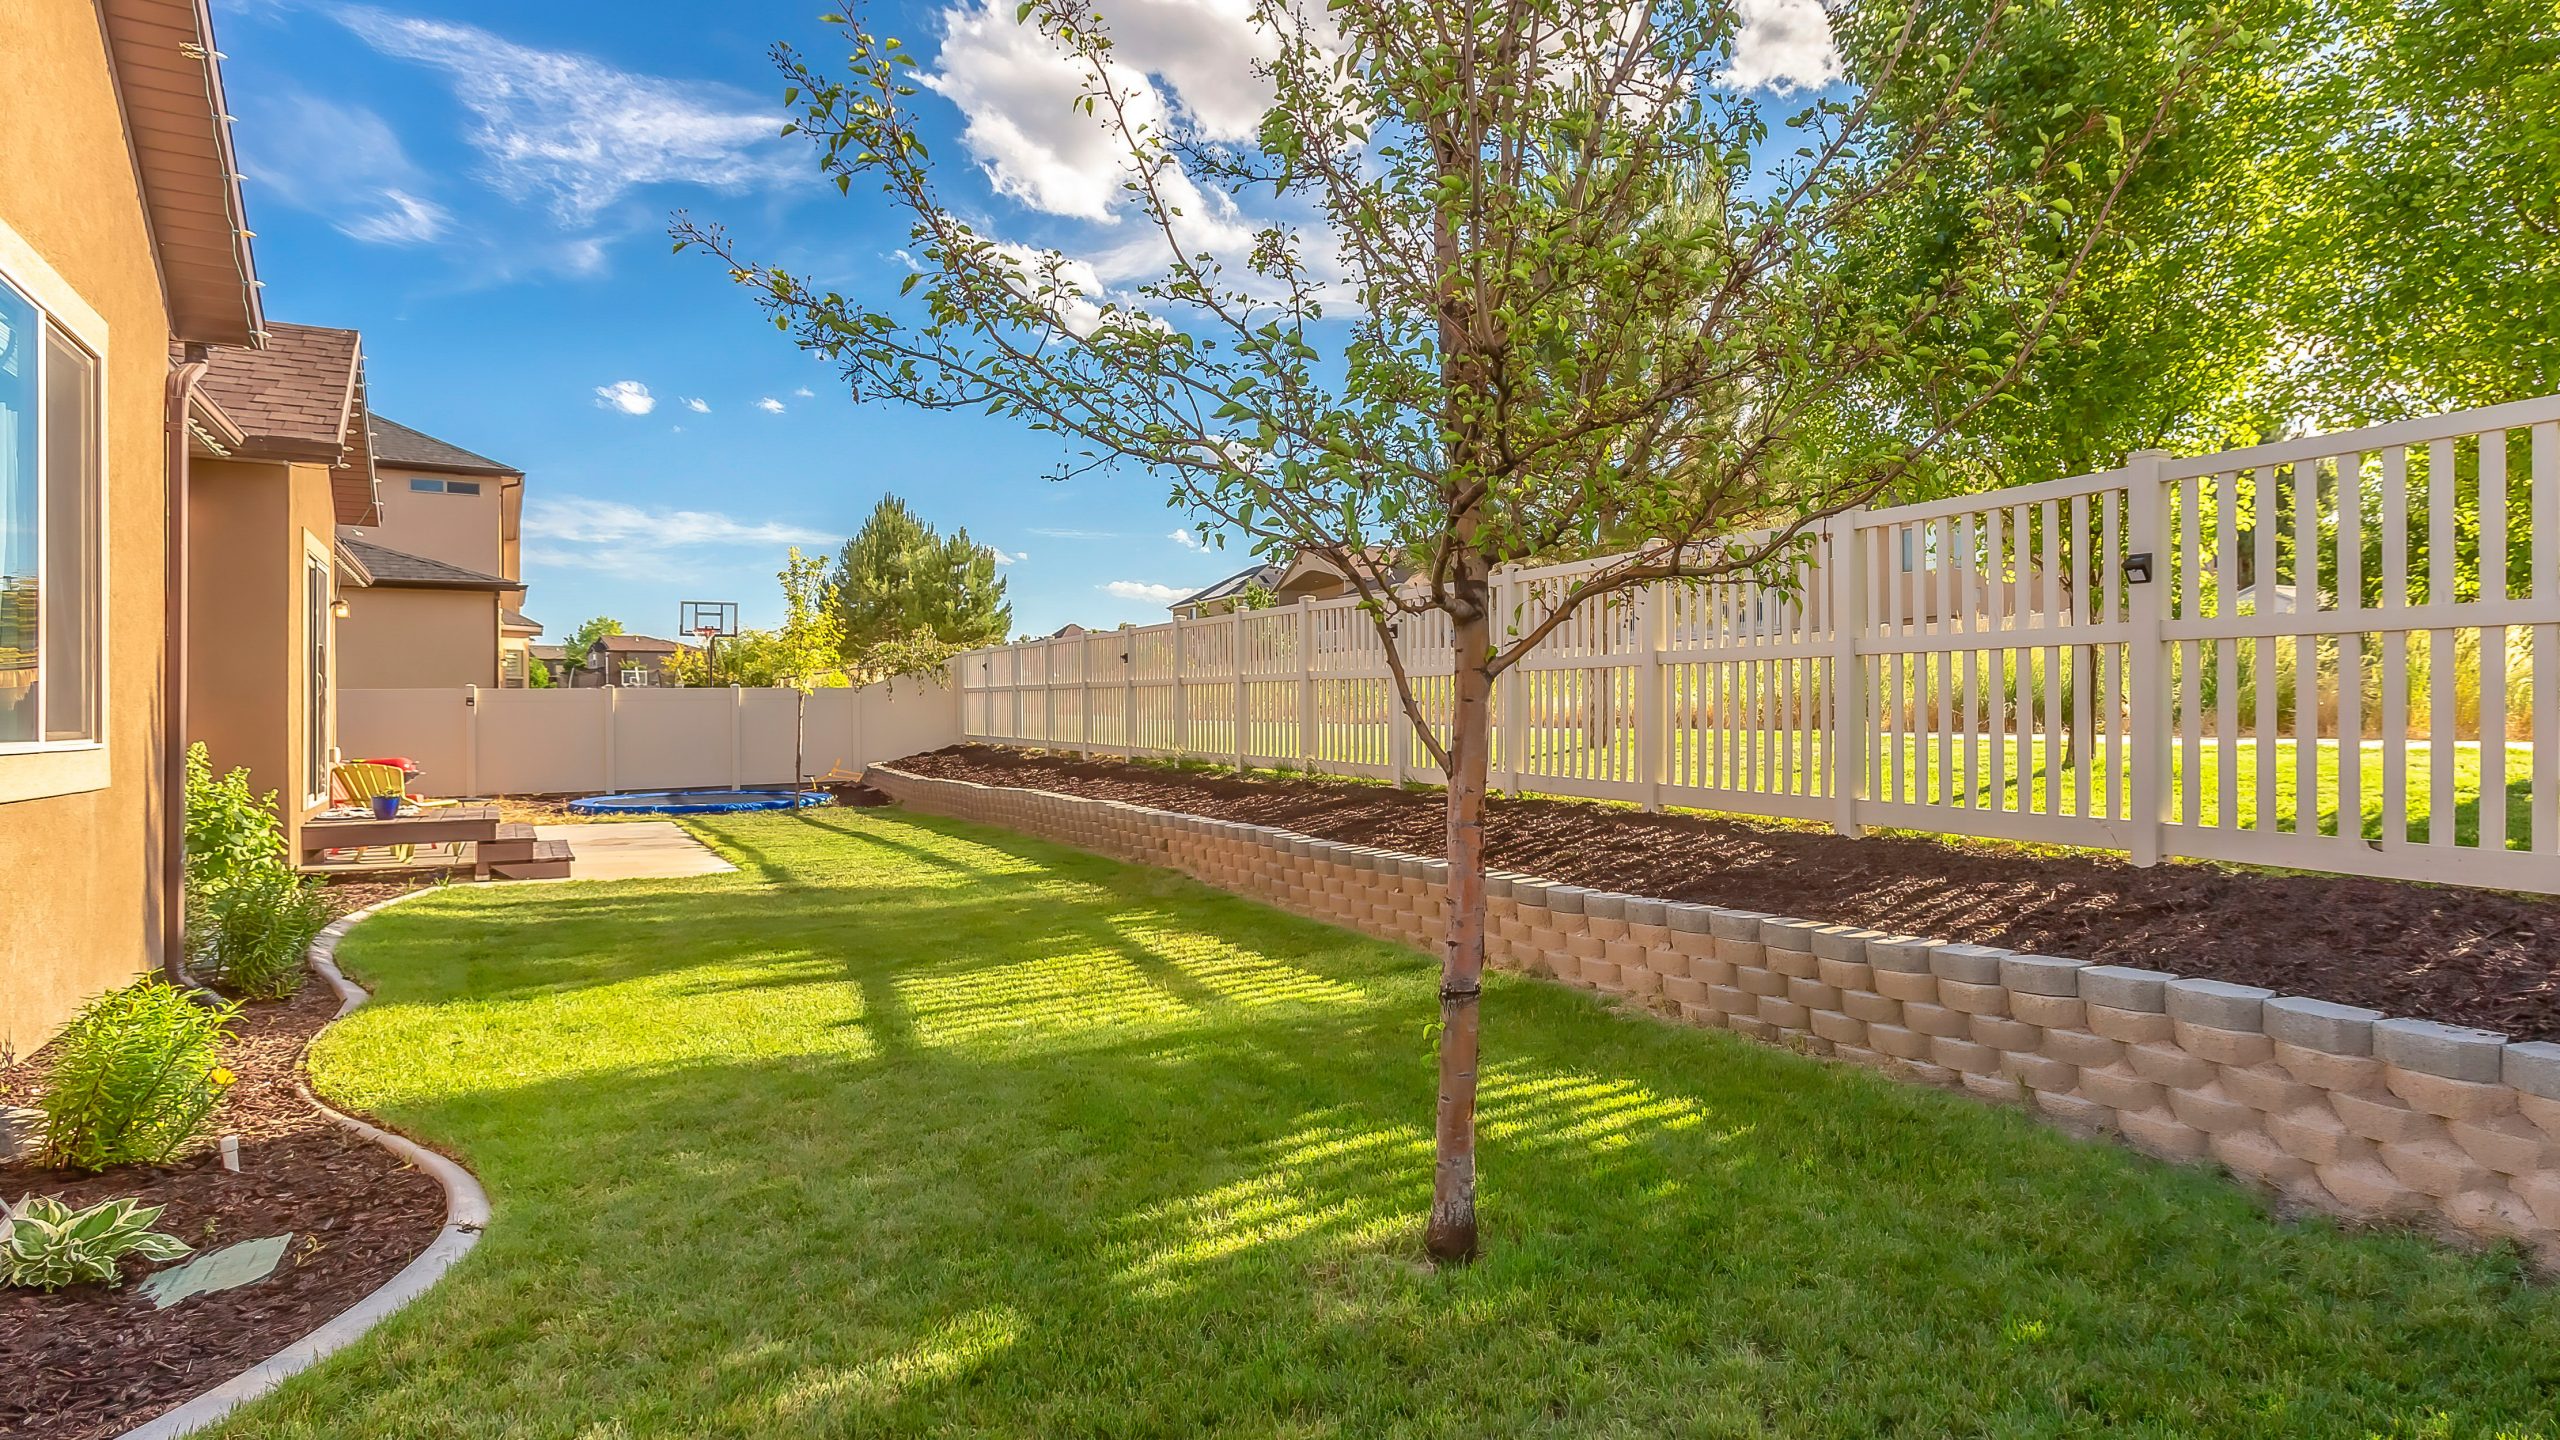 A Homeowner's Guide to the Types of Residential Fences